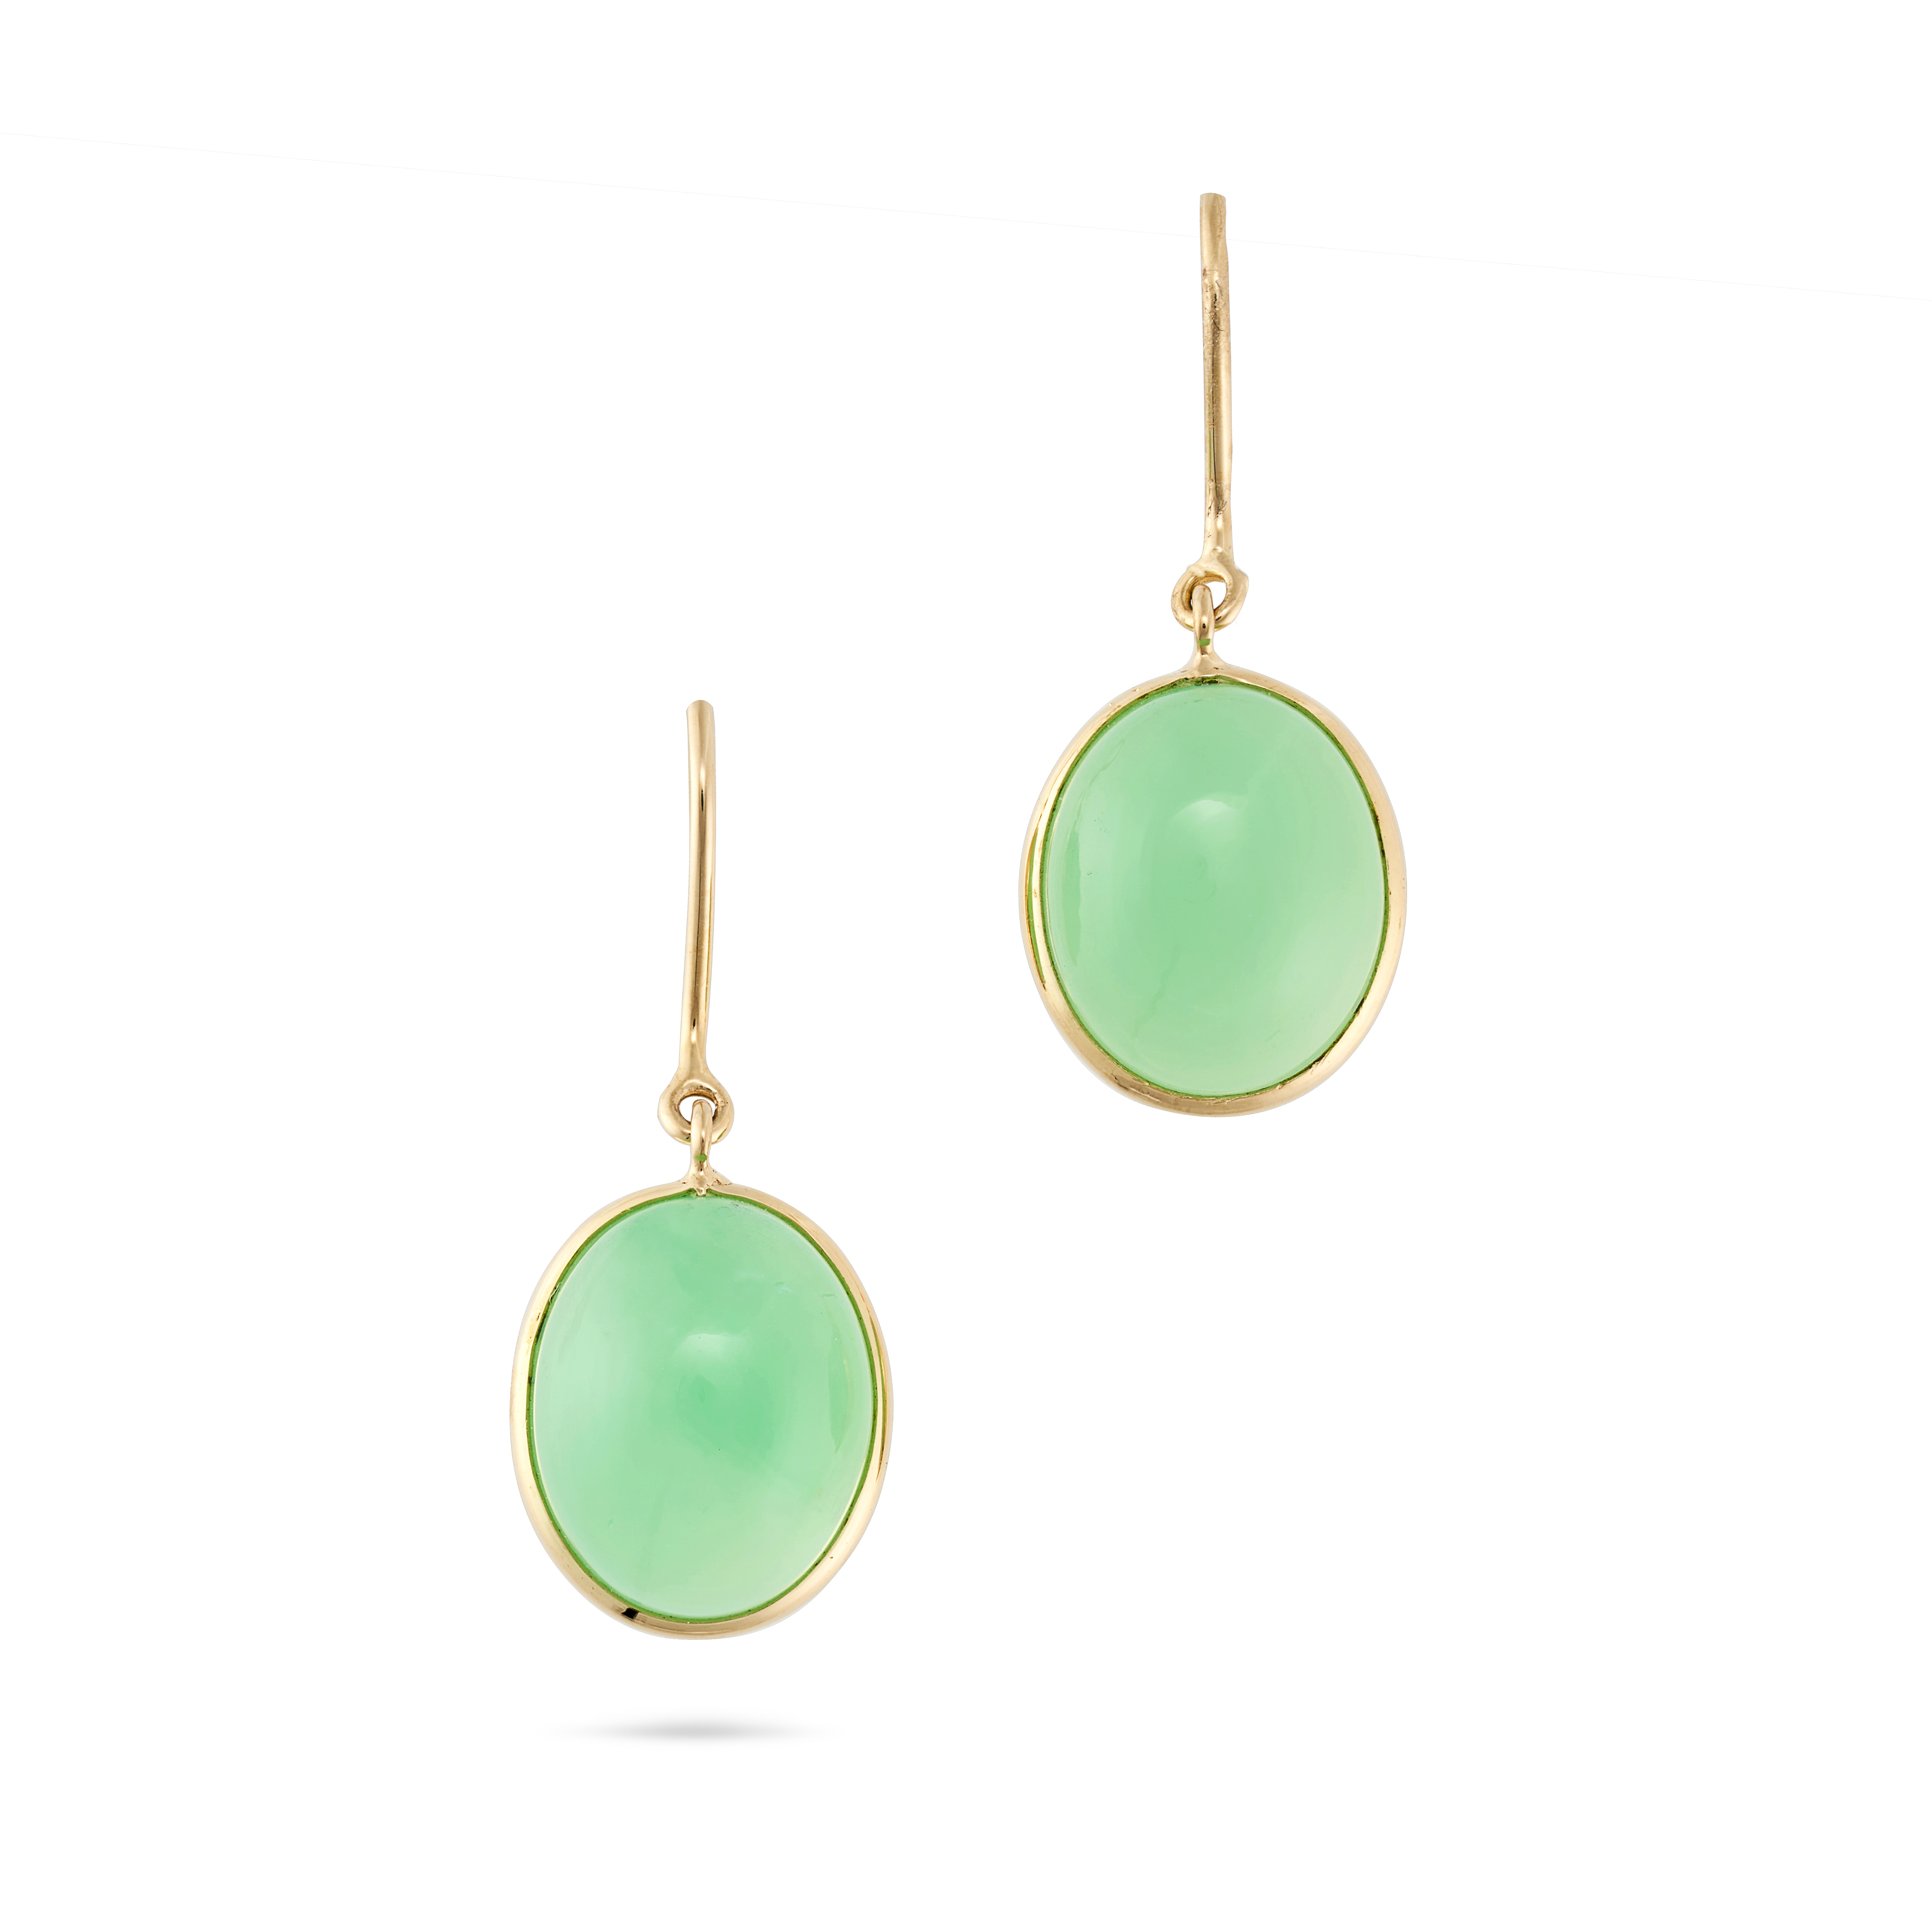 A PAIR OF CHRYSOPRASE DROP EARRINGS each set with an oval cabochon chrysoprase, stamped 18K, 2.5c...